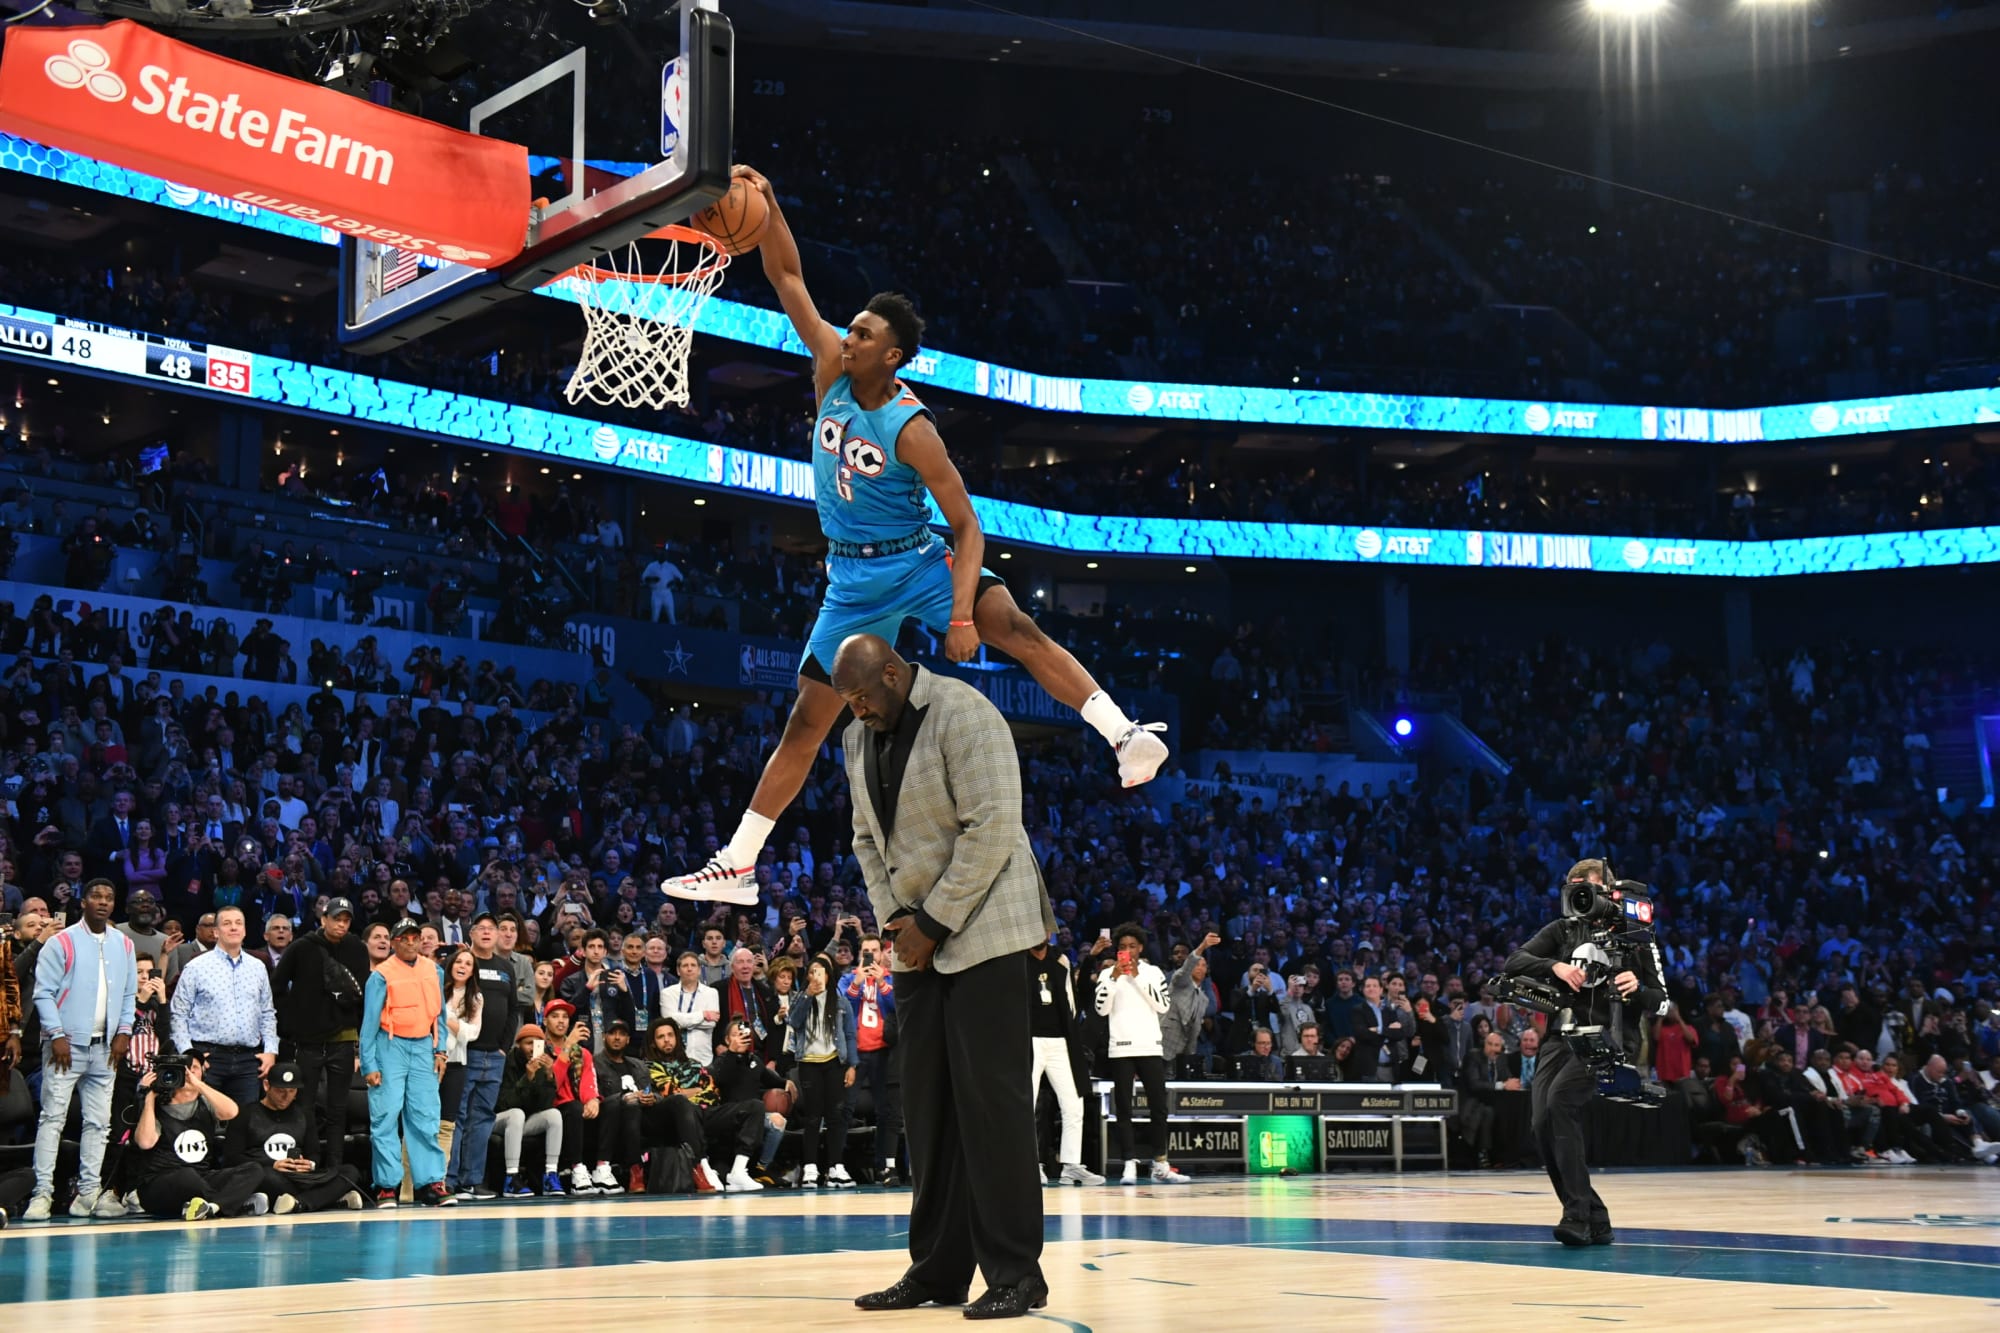 Report: Hamidou Diallo wants to defend dunk contest crown